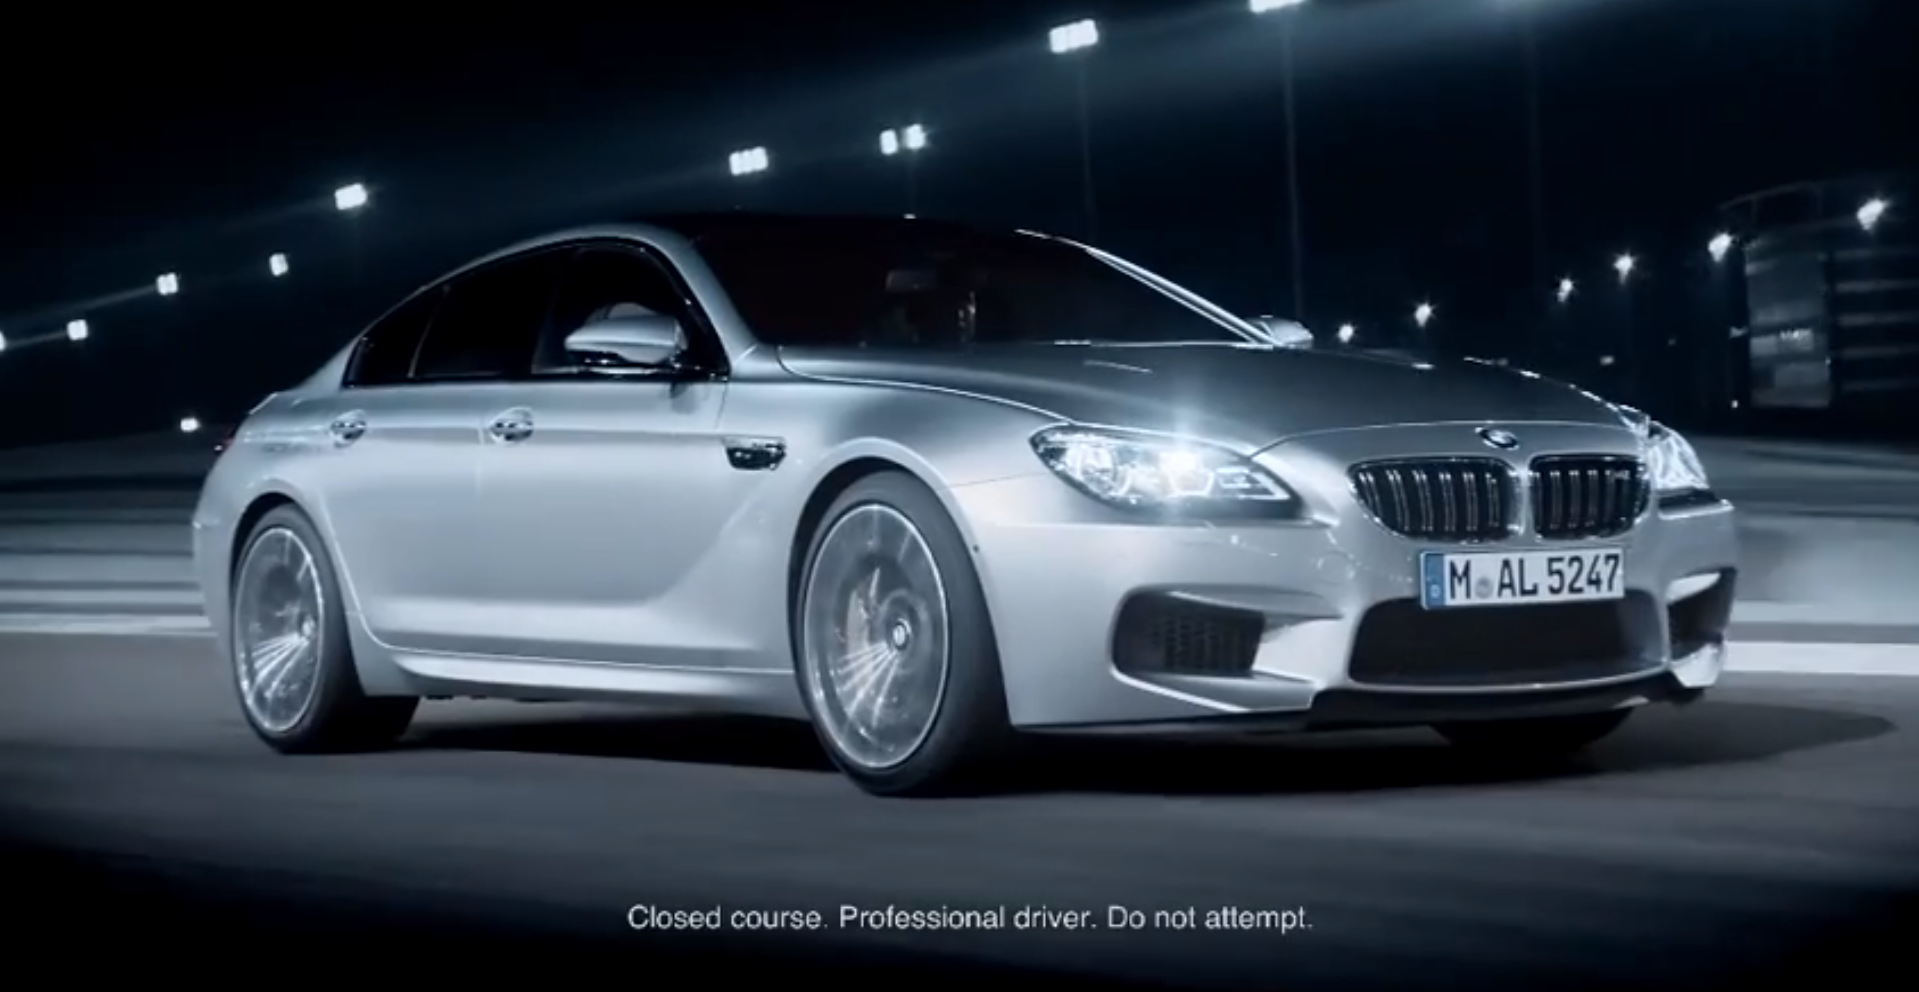 New bmw 6 series commercial #7